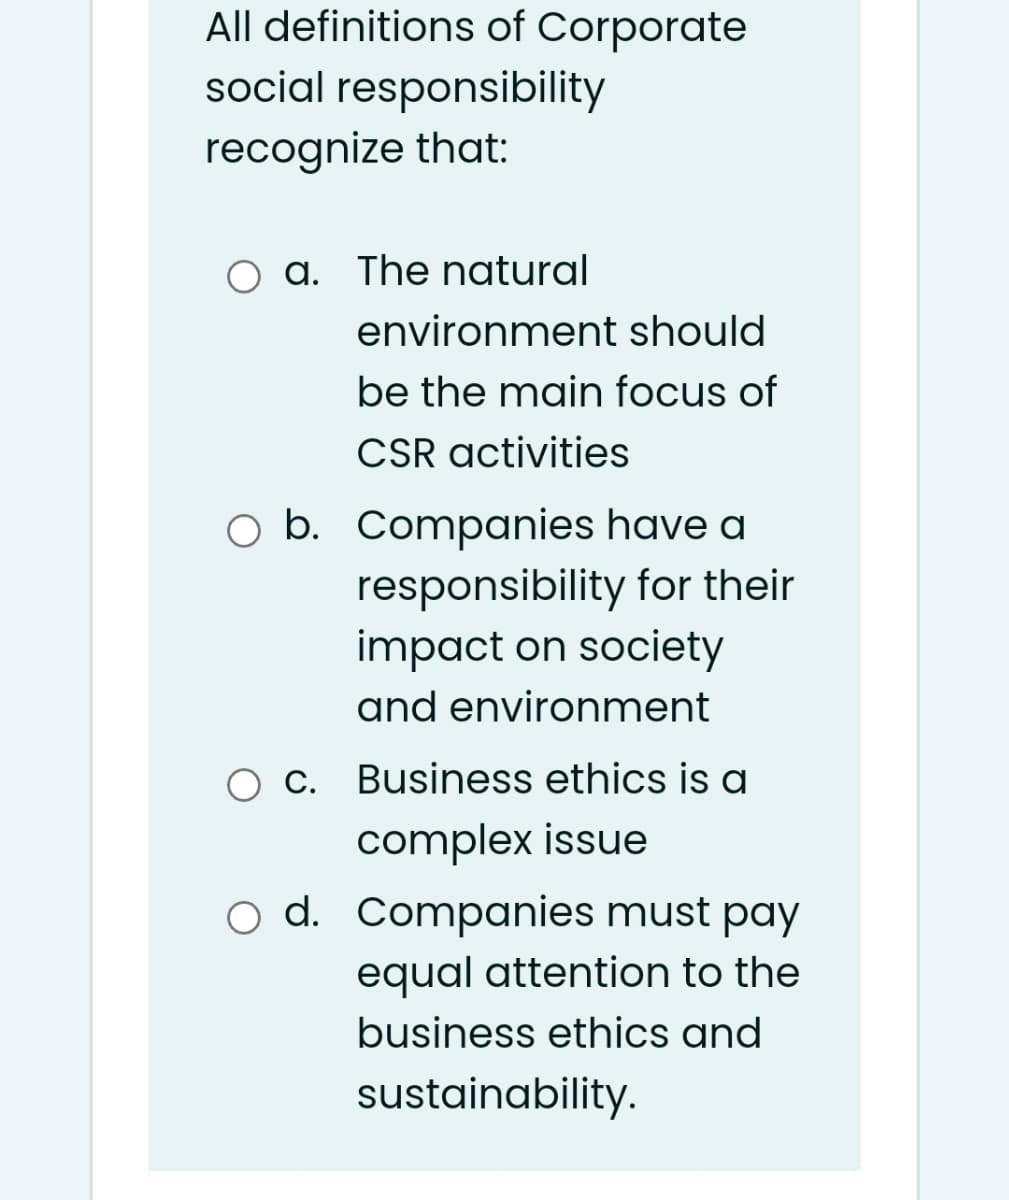 All definitions of Corporate
social responsibility
recognize that:
O a. The natural
environment should
be the main focus of
CSR activities
b. Companies have a
responsibility for their
impact on society
and environment
O C. Business ethics is a
complex issue
o d. Companies must pay
equal attention to the
business ethics and
sustainability.
